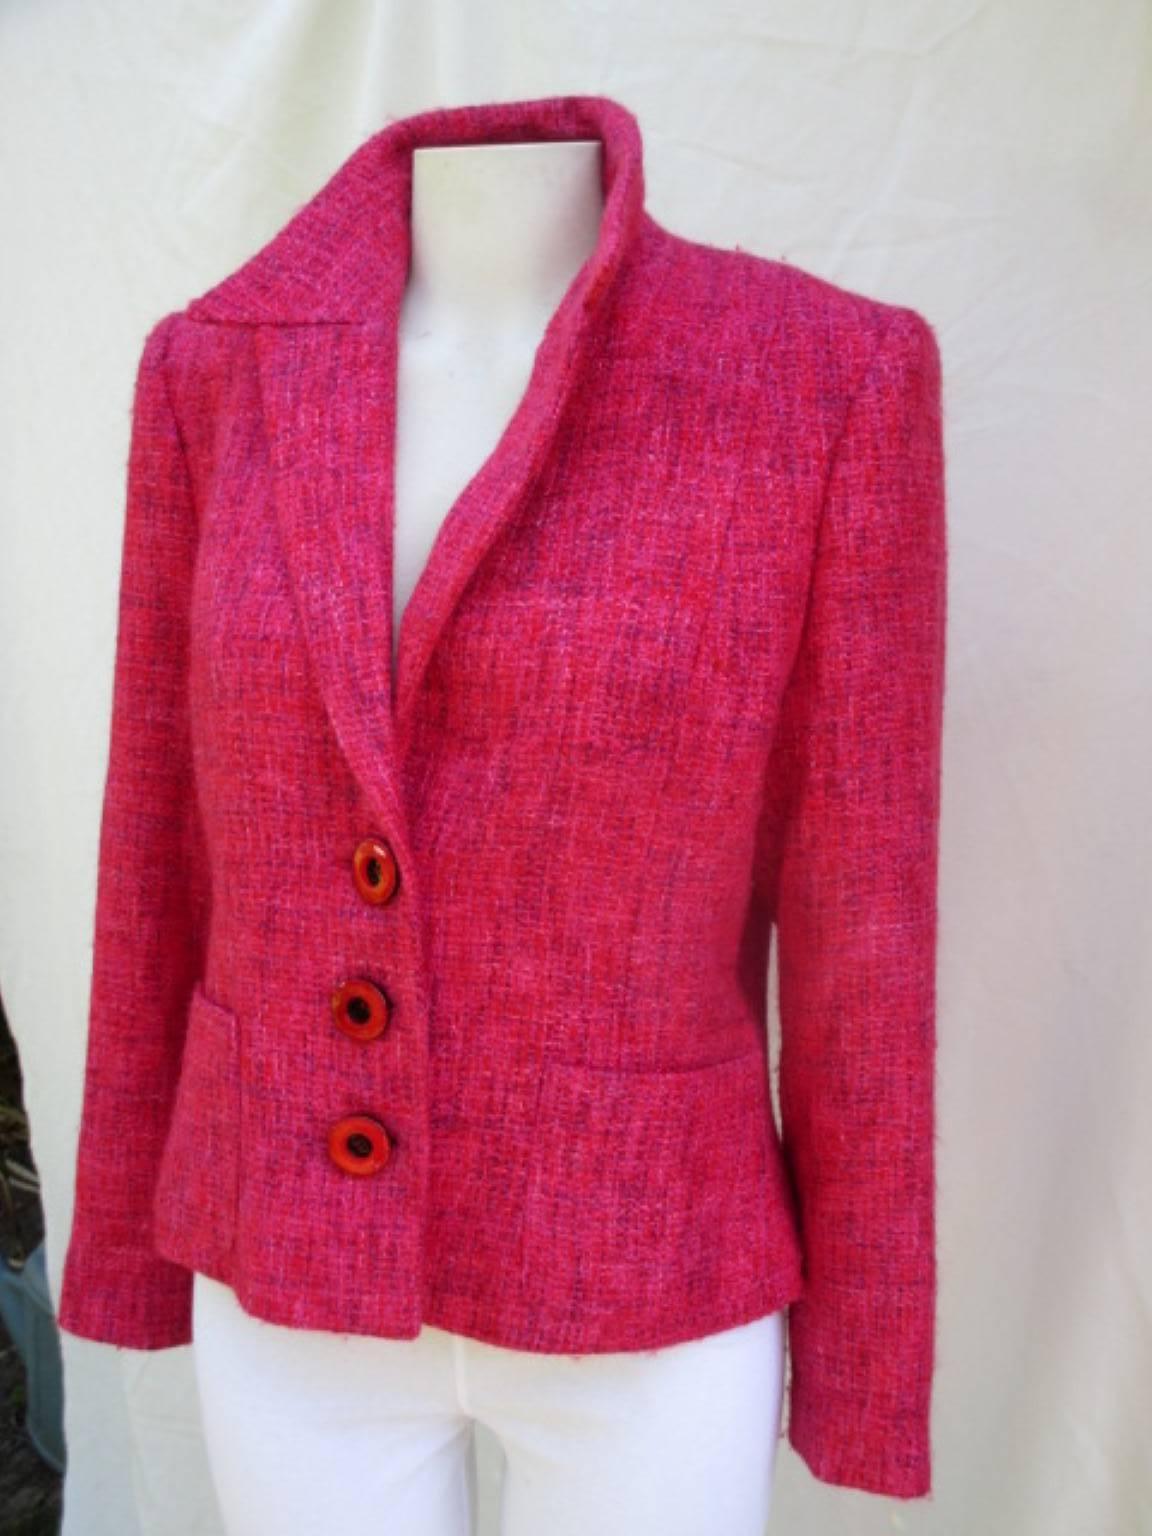 Pierre Balmain Paris red rose light wool jacket In Good Condition For Sale In Amsterdam, NL